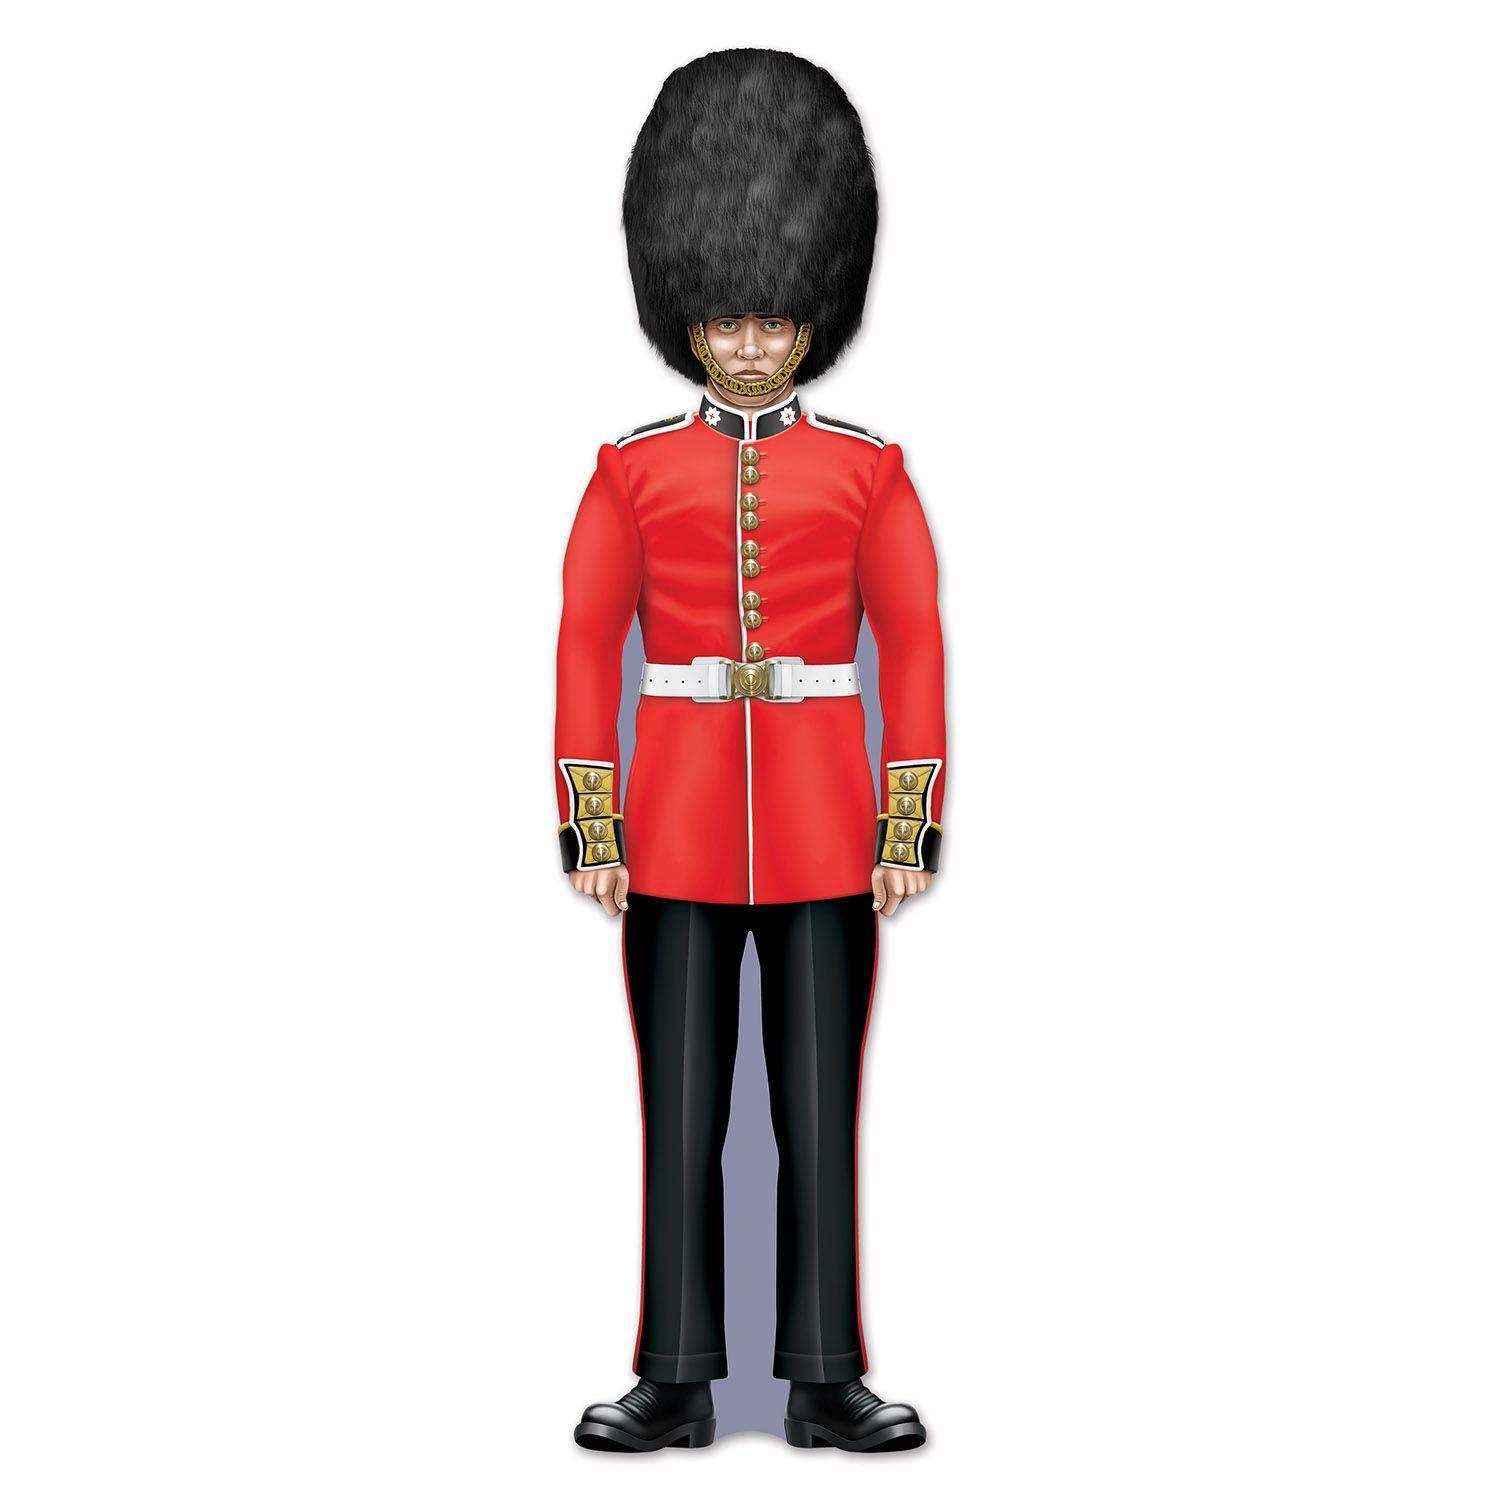 Royal Guard Cutout Decorations 36" tall by Beistle 54627 and available here at Karnival Costumes online party shop